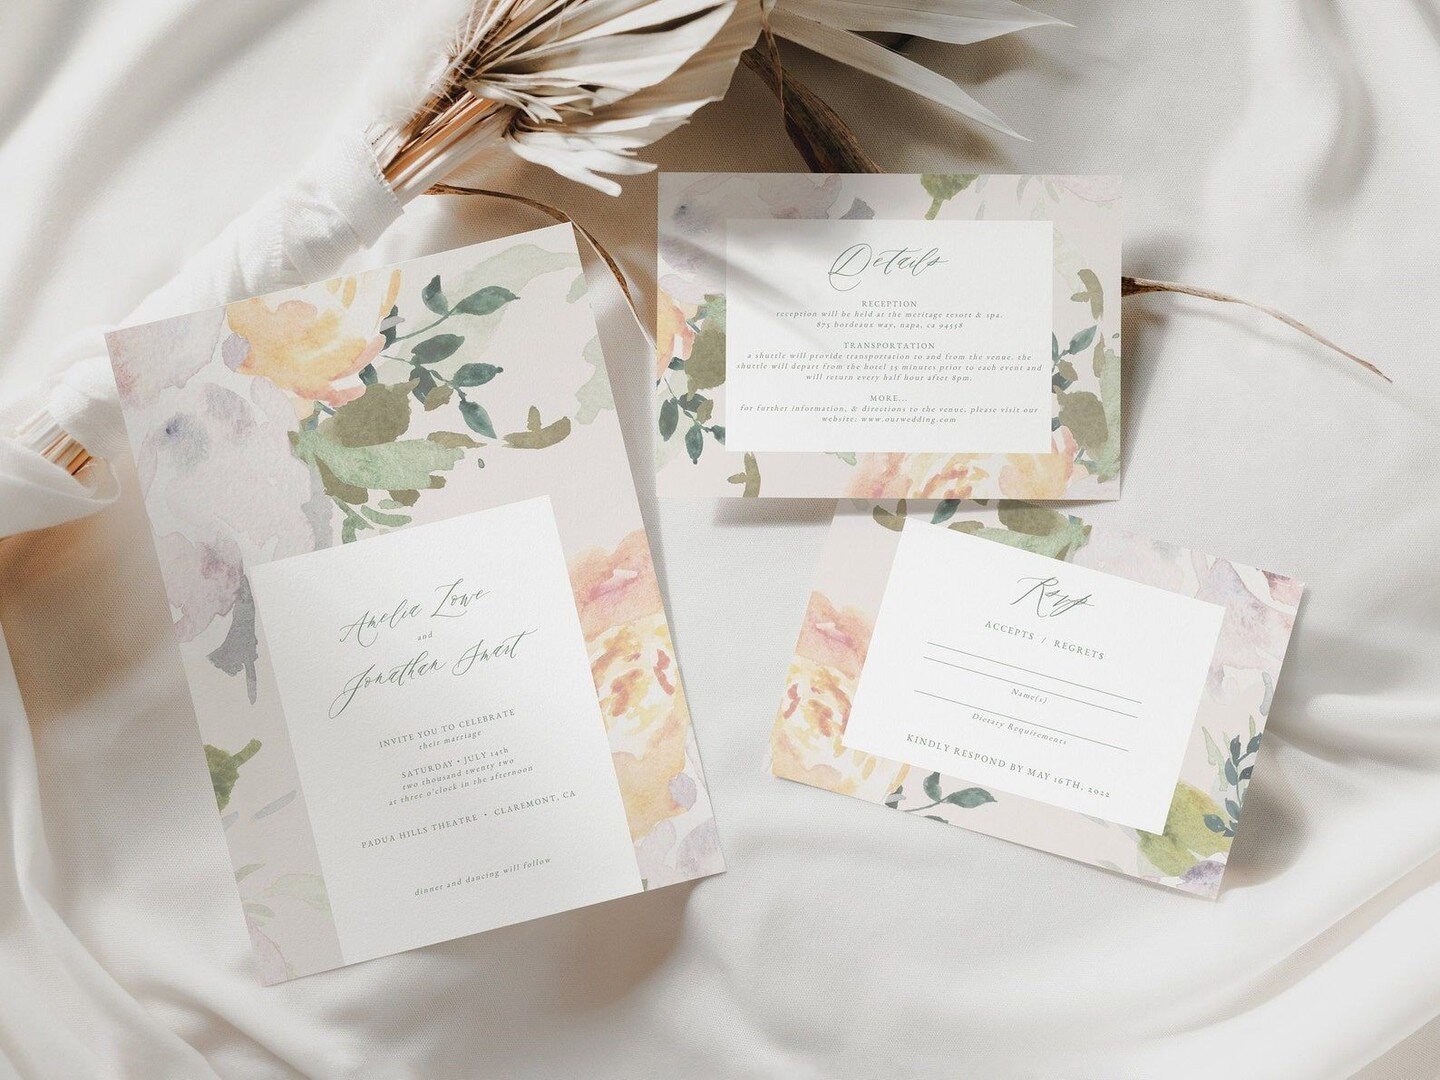 🤍⁣
&bull; editable wedding templates⁣
&bull; instant download⁣
&bull; print at home or print shop⁠⁣
⁣
This template is editable directly in your web browser! No need to download any software or fonts.⁣
〰⁣
Head to my Blanche Paperie Etsy shop (link i